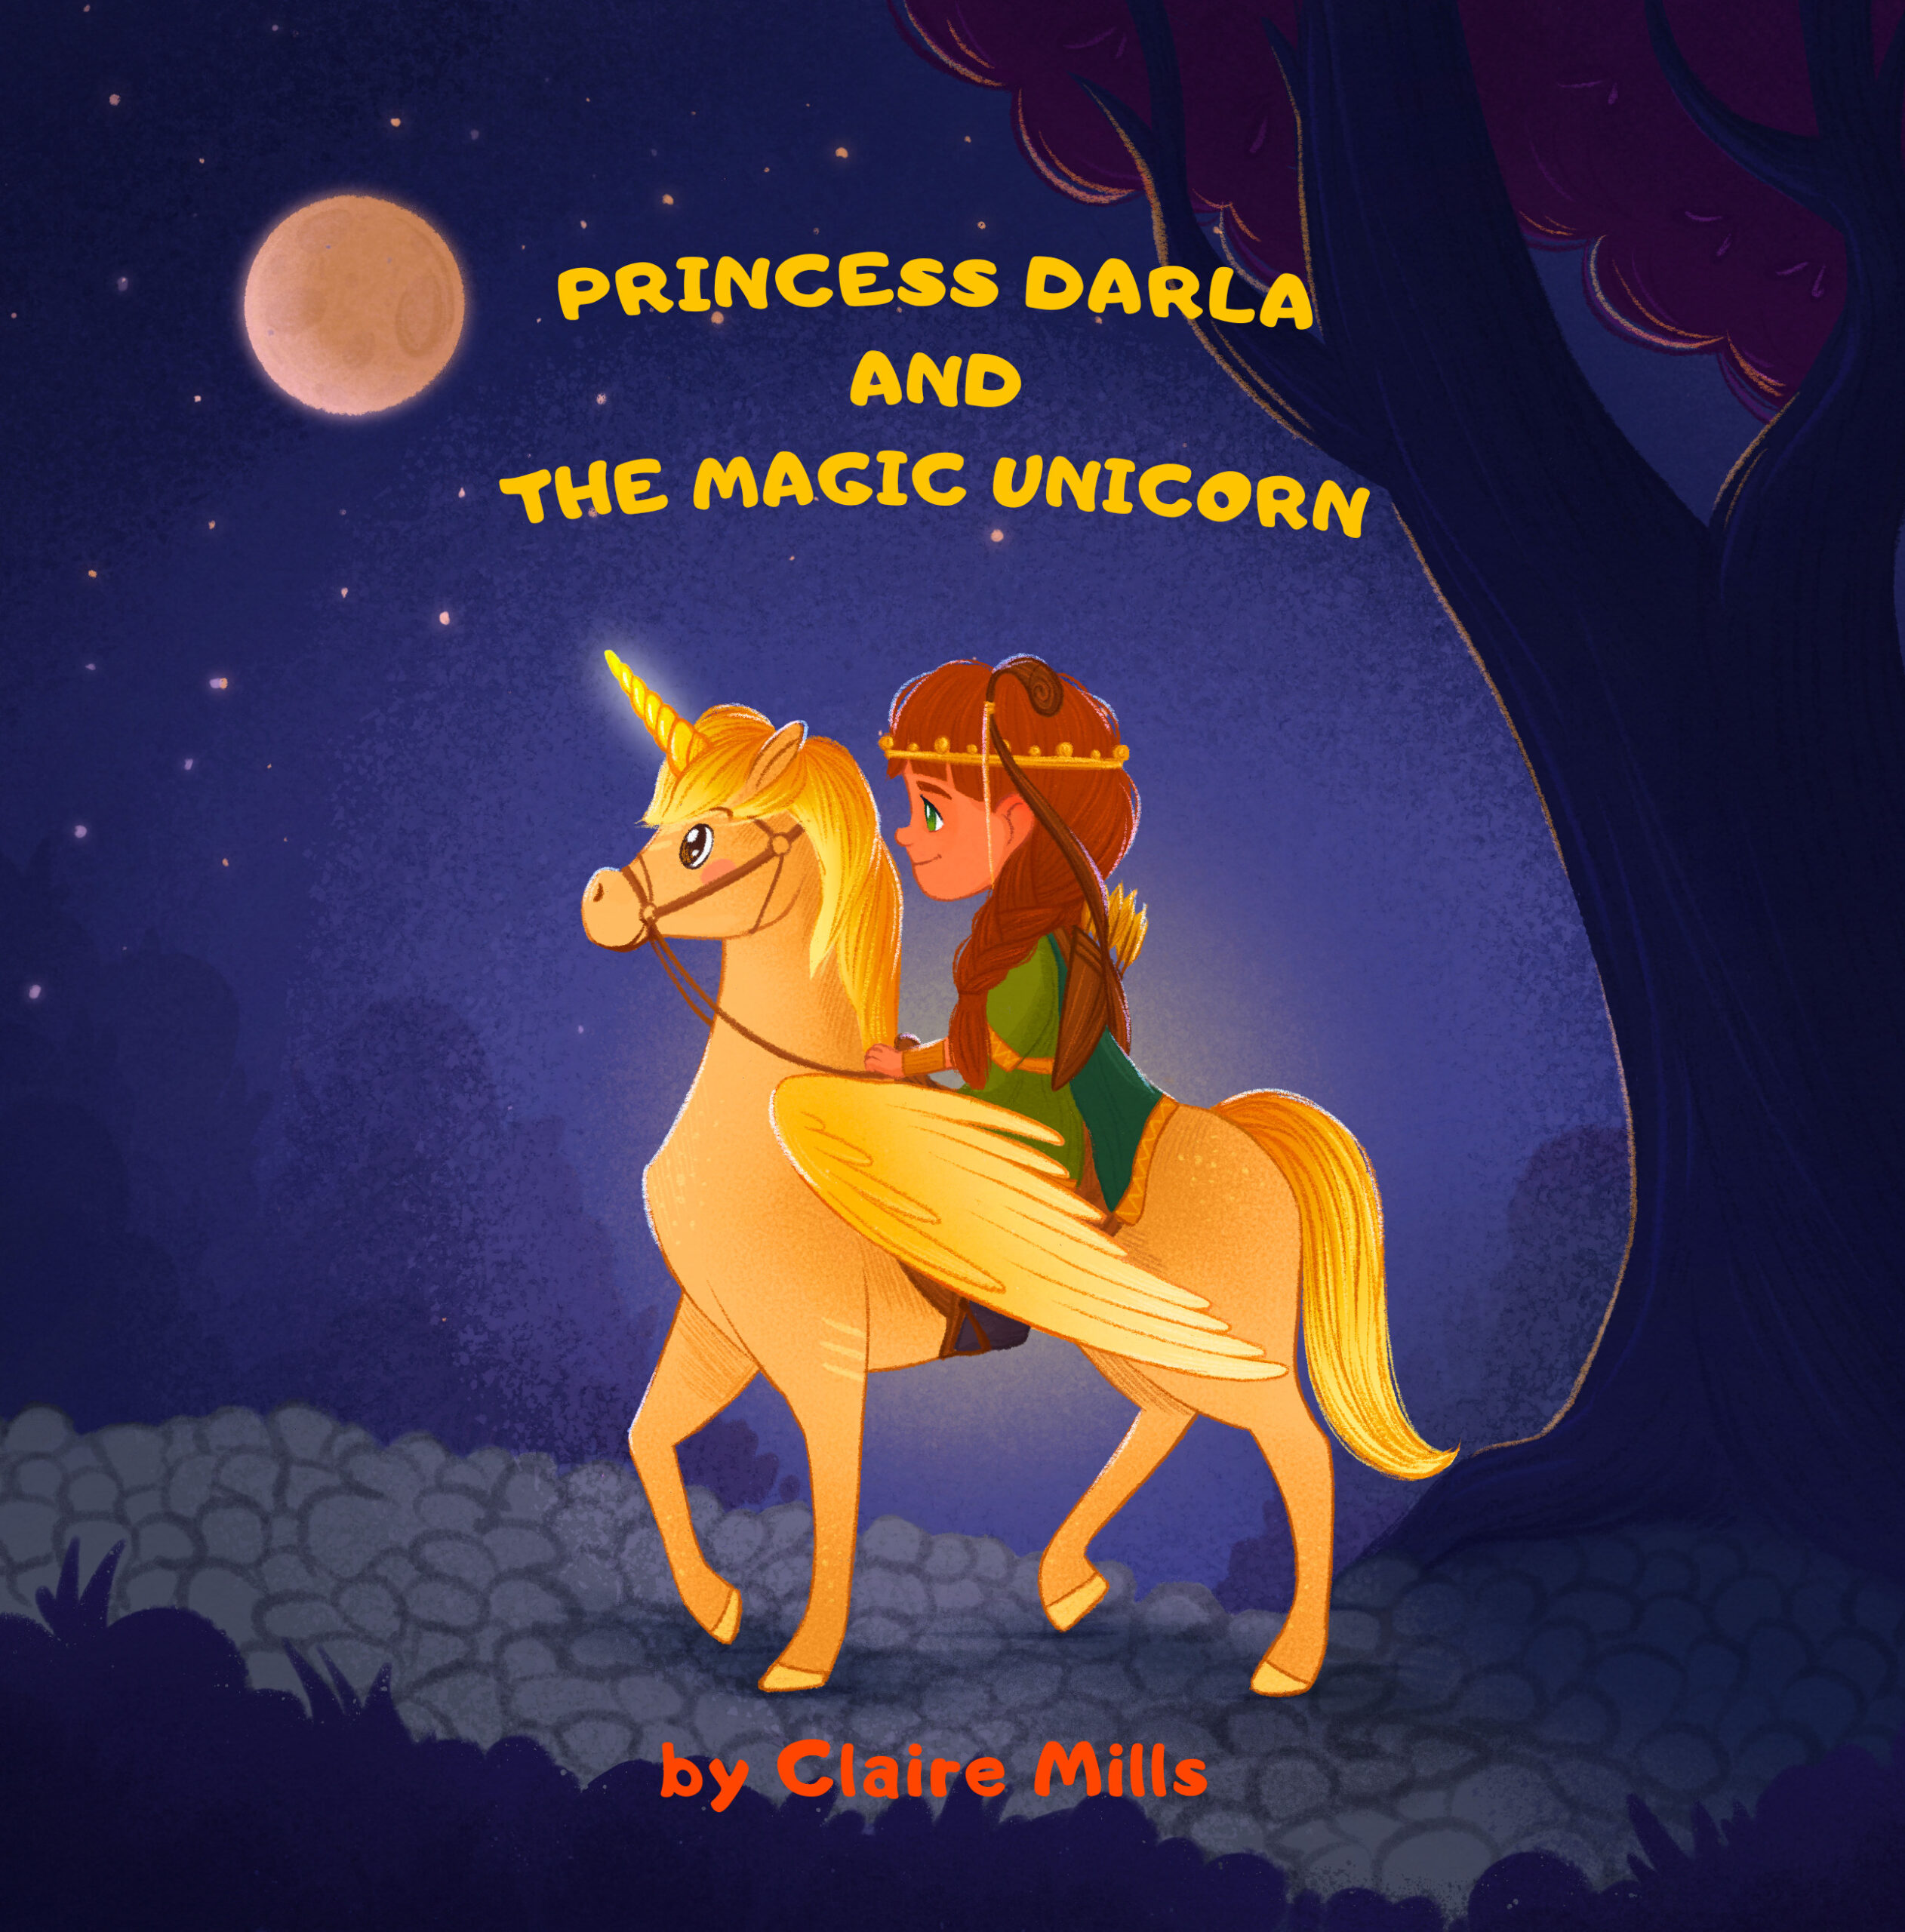 FREE: Princess Darla and the magic unicorn by Claire Mills